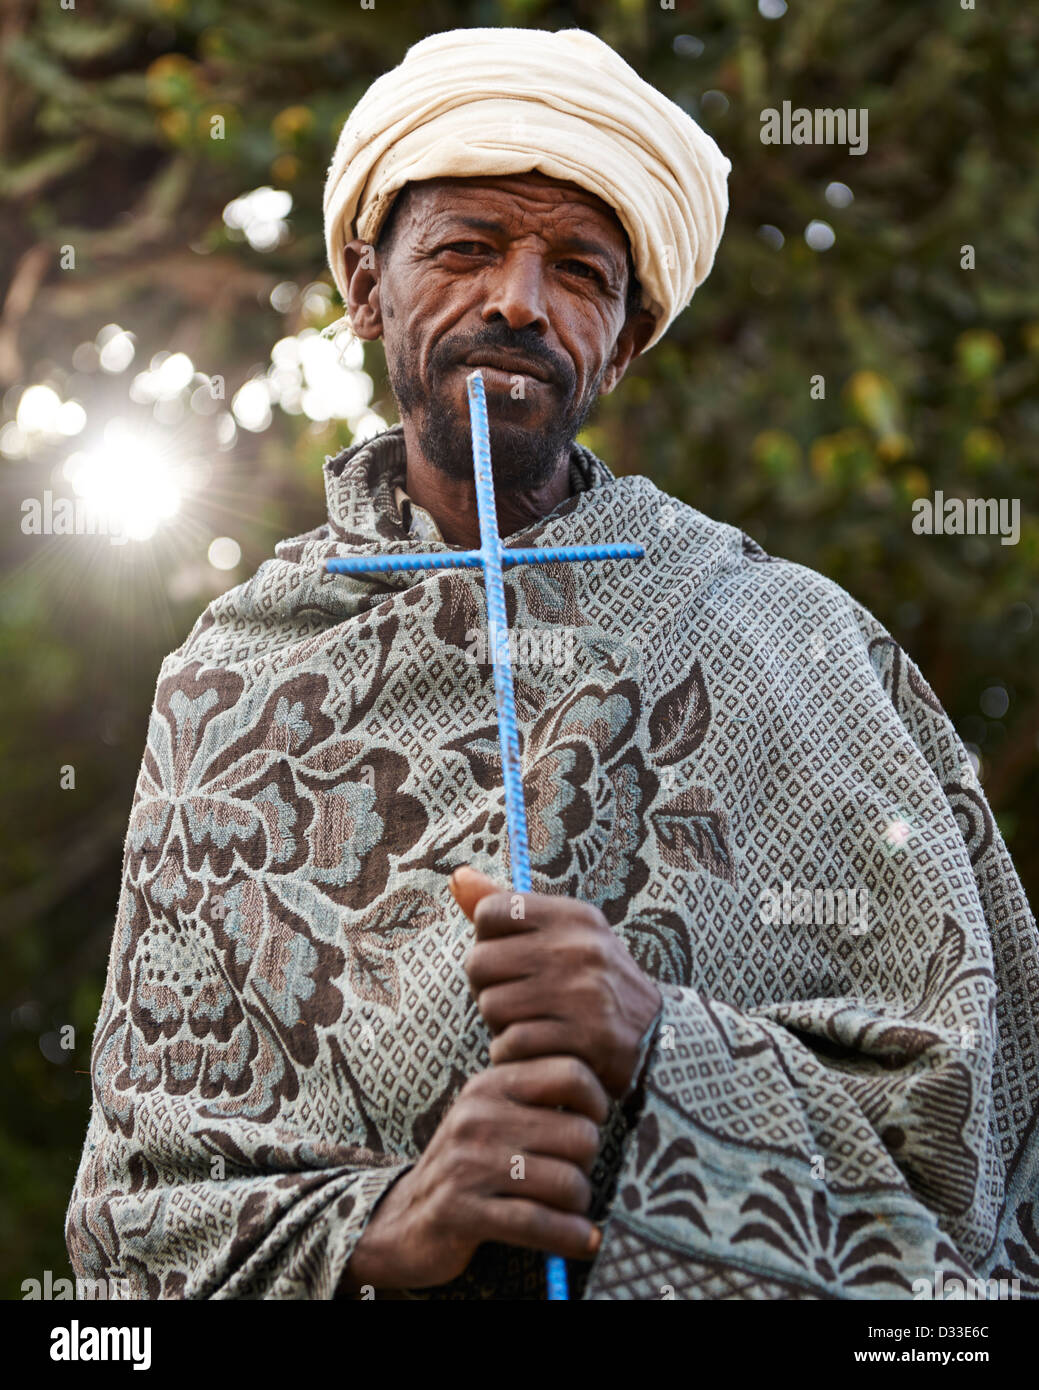 A elder local pilgrim man carrying a blue cross and standing in front of a forest Stock Photo